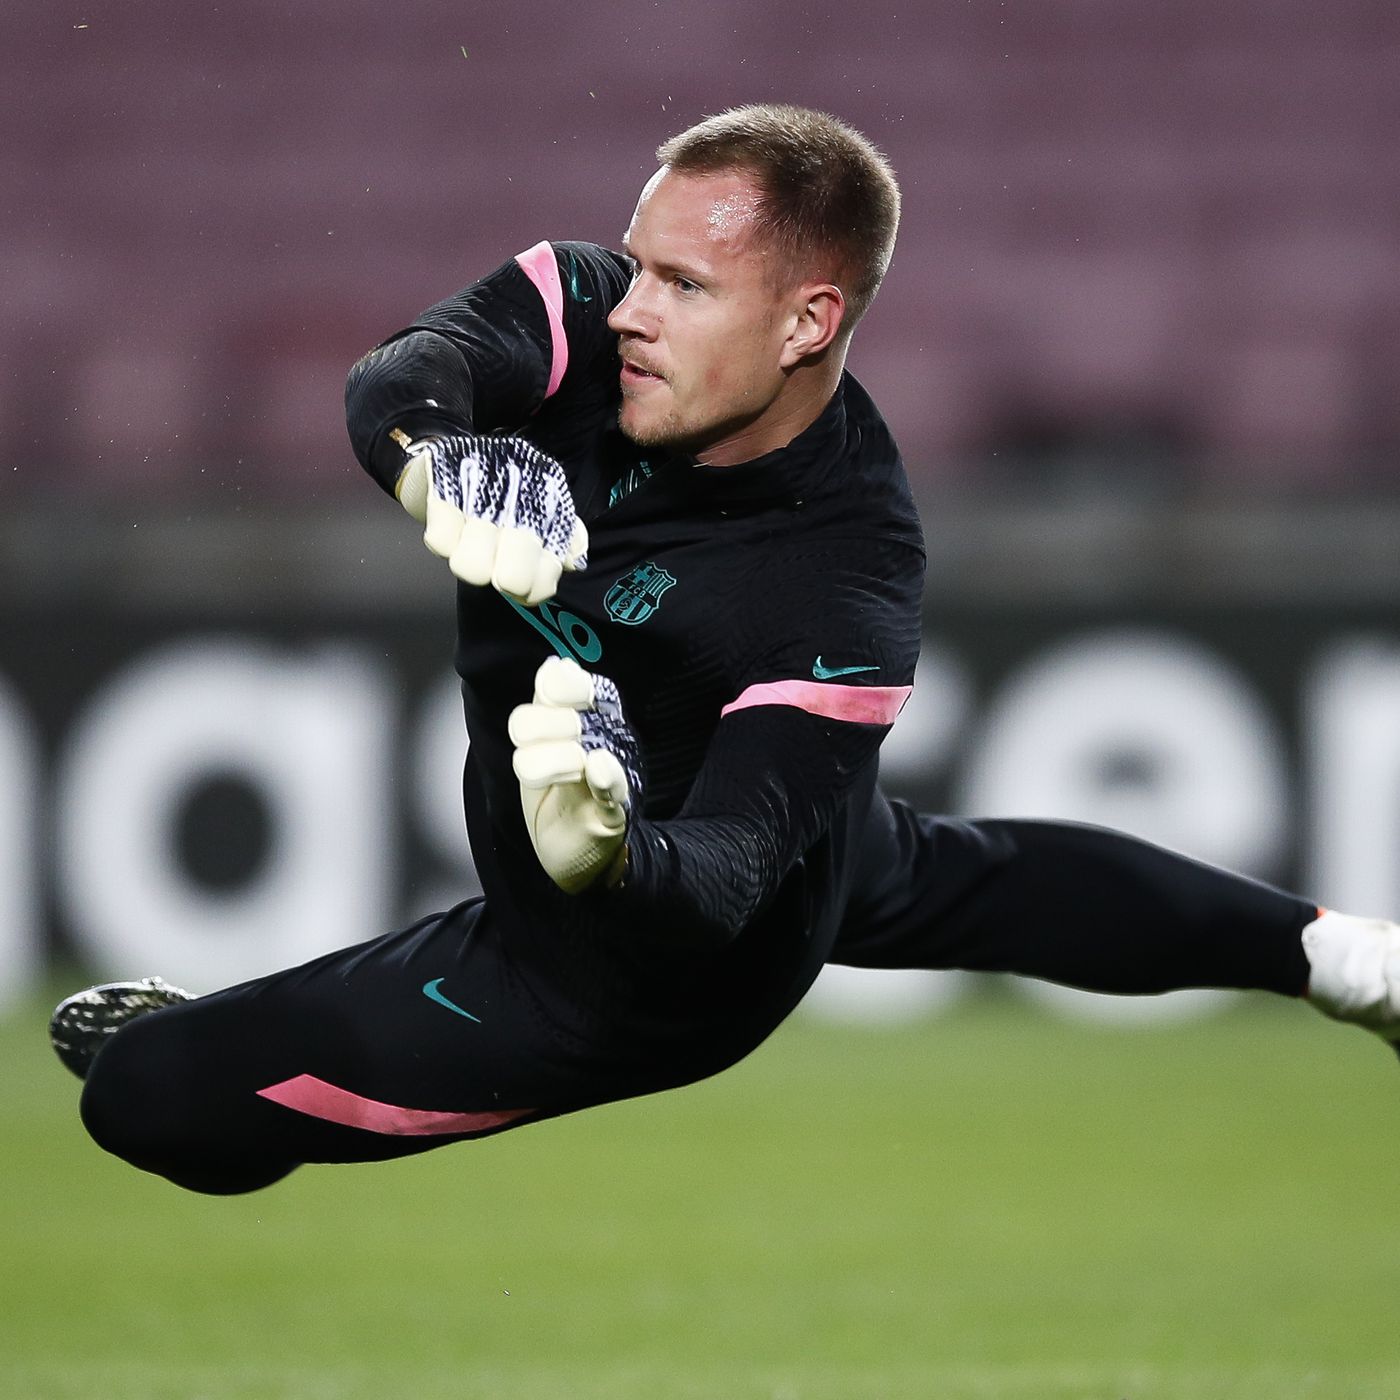 Why Hasn't Marc Andre Ter Stegen Been Called Up By Germany?